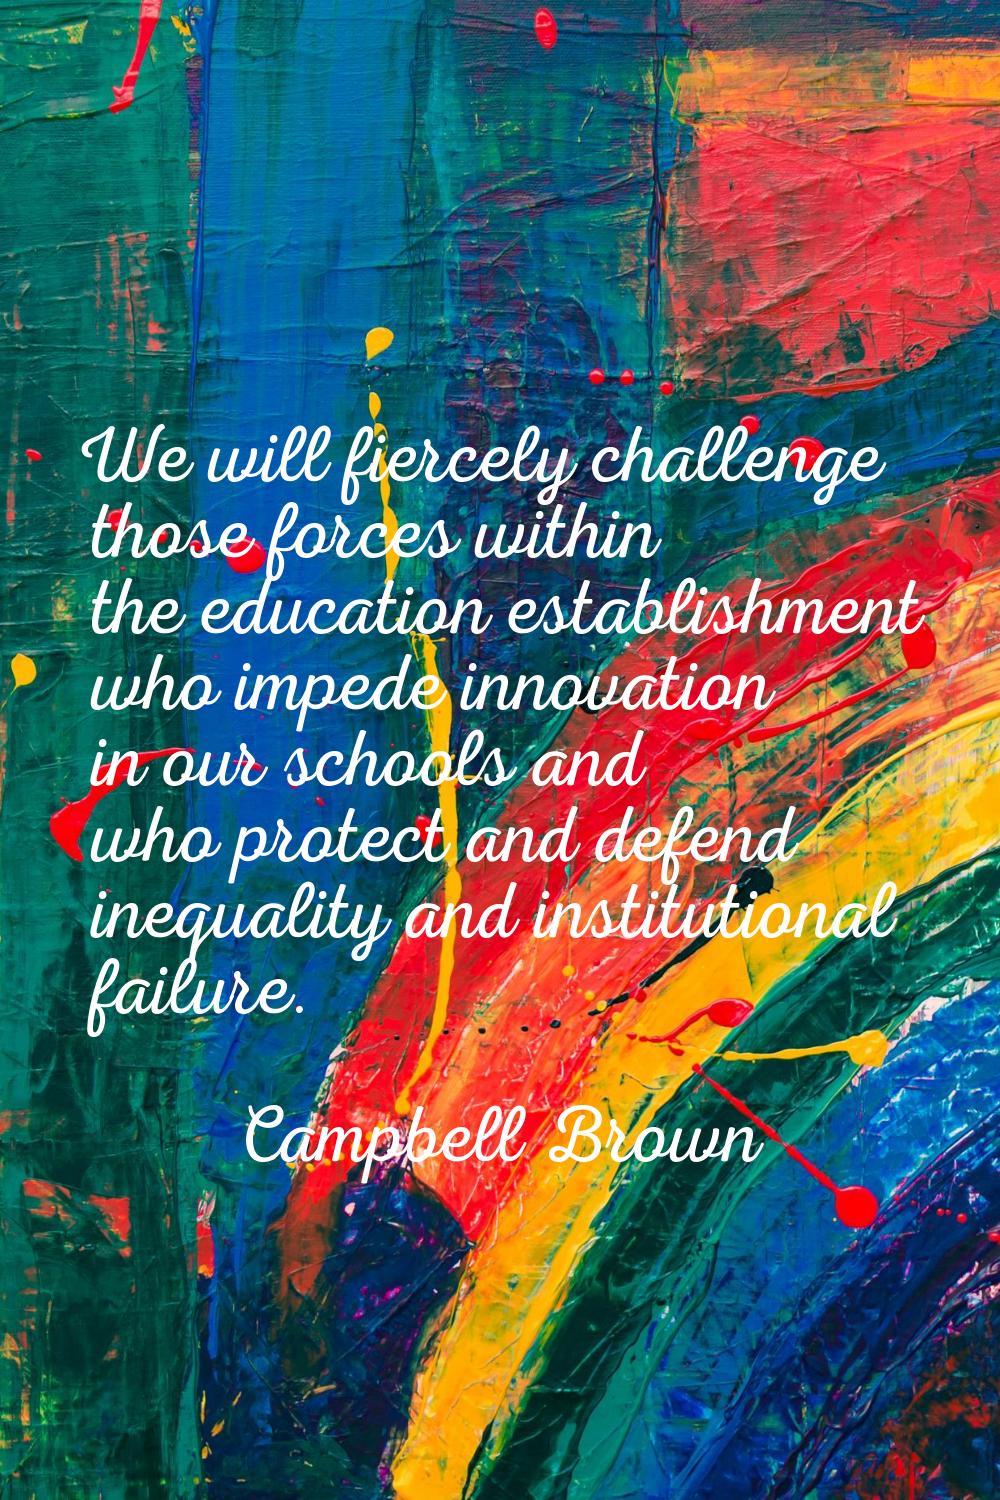 We will fiercely challenge those forces within the education establishment who impede innovation in